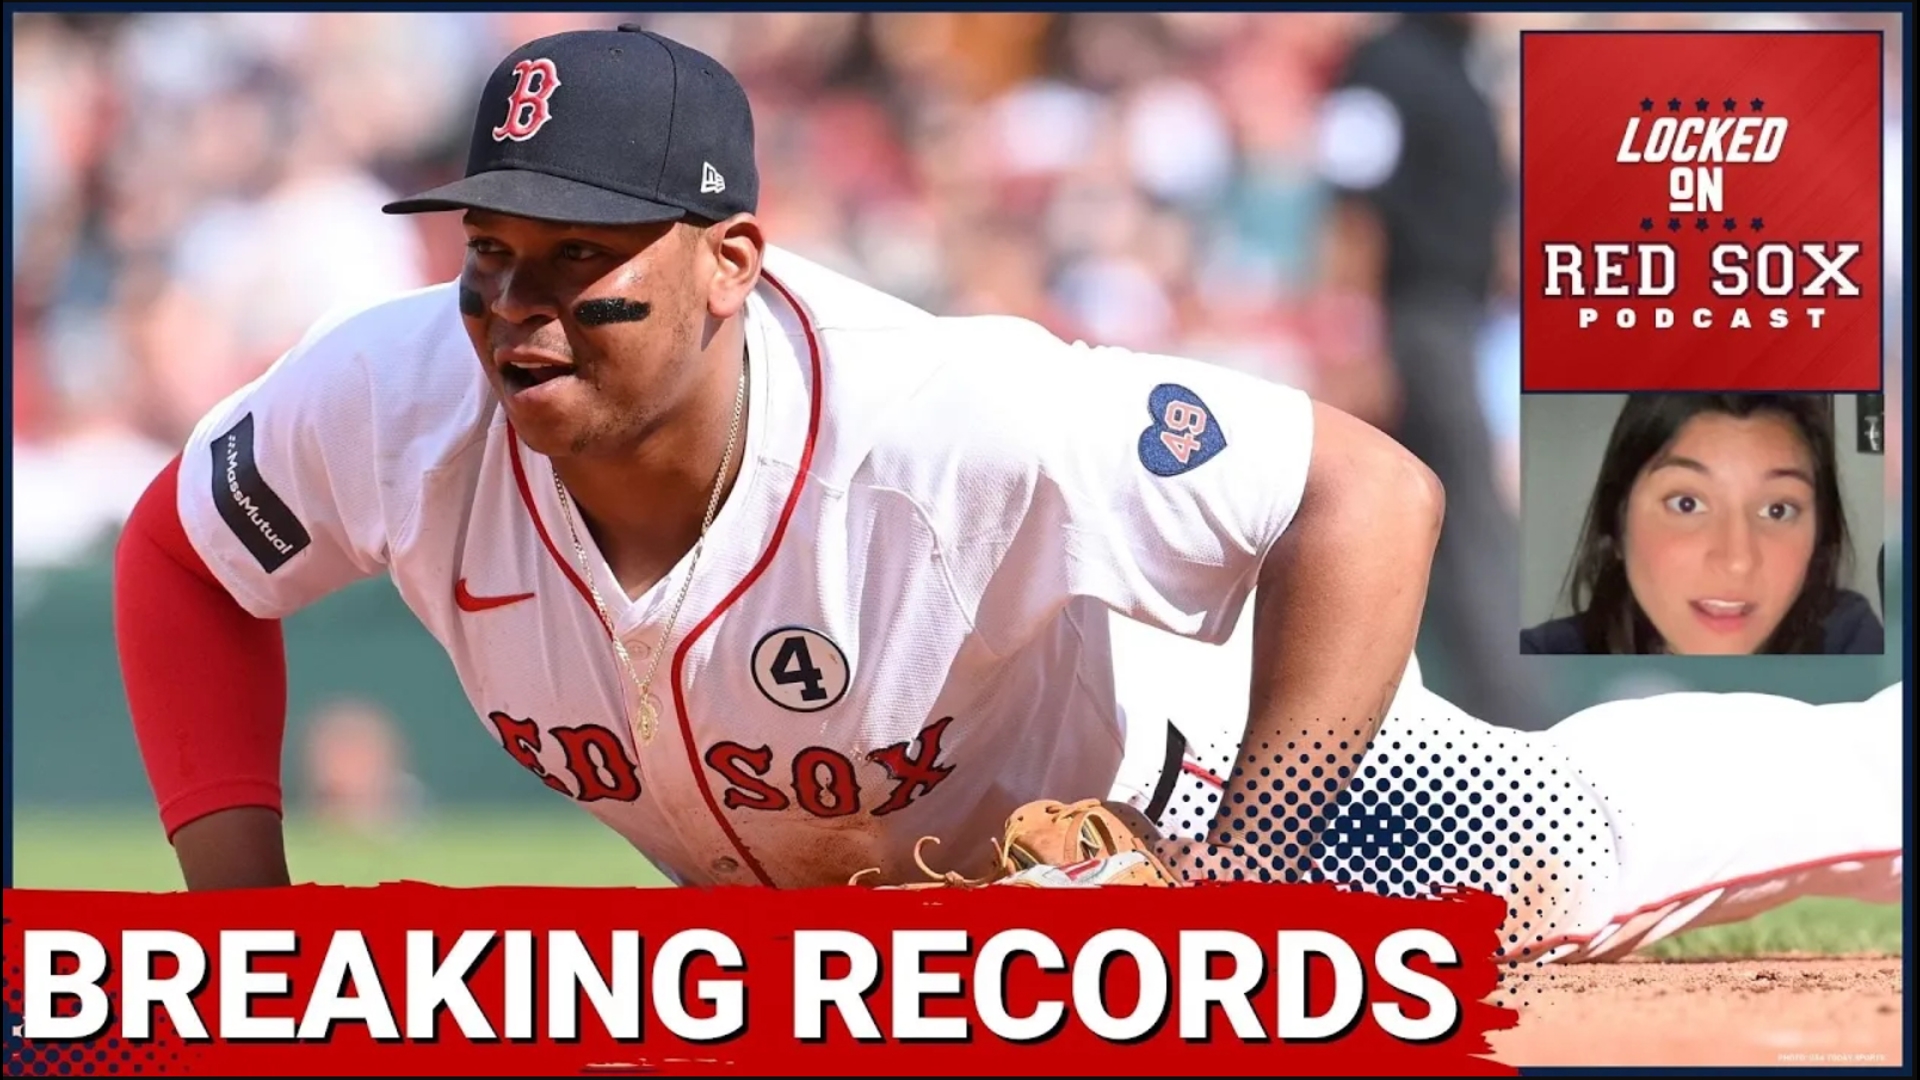 Rafael Devers made history by passing Jim Rice on the list for most extra-base hits by Boston Red Sox player before turning 28.